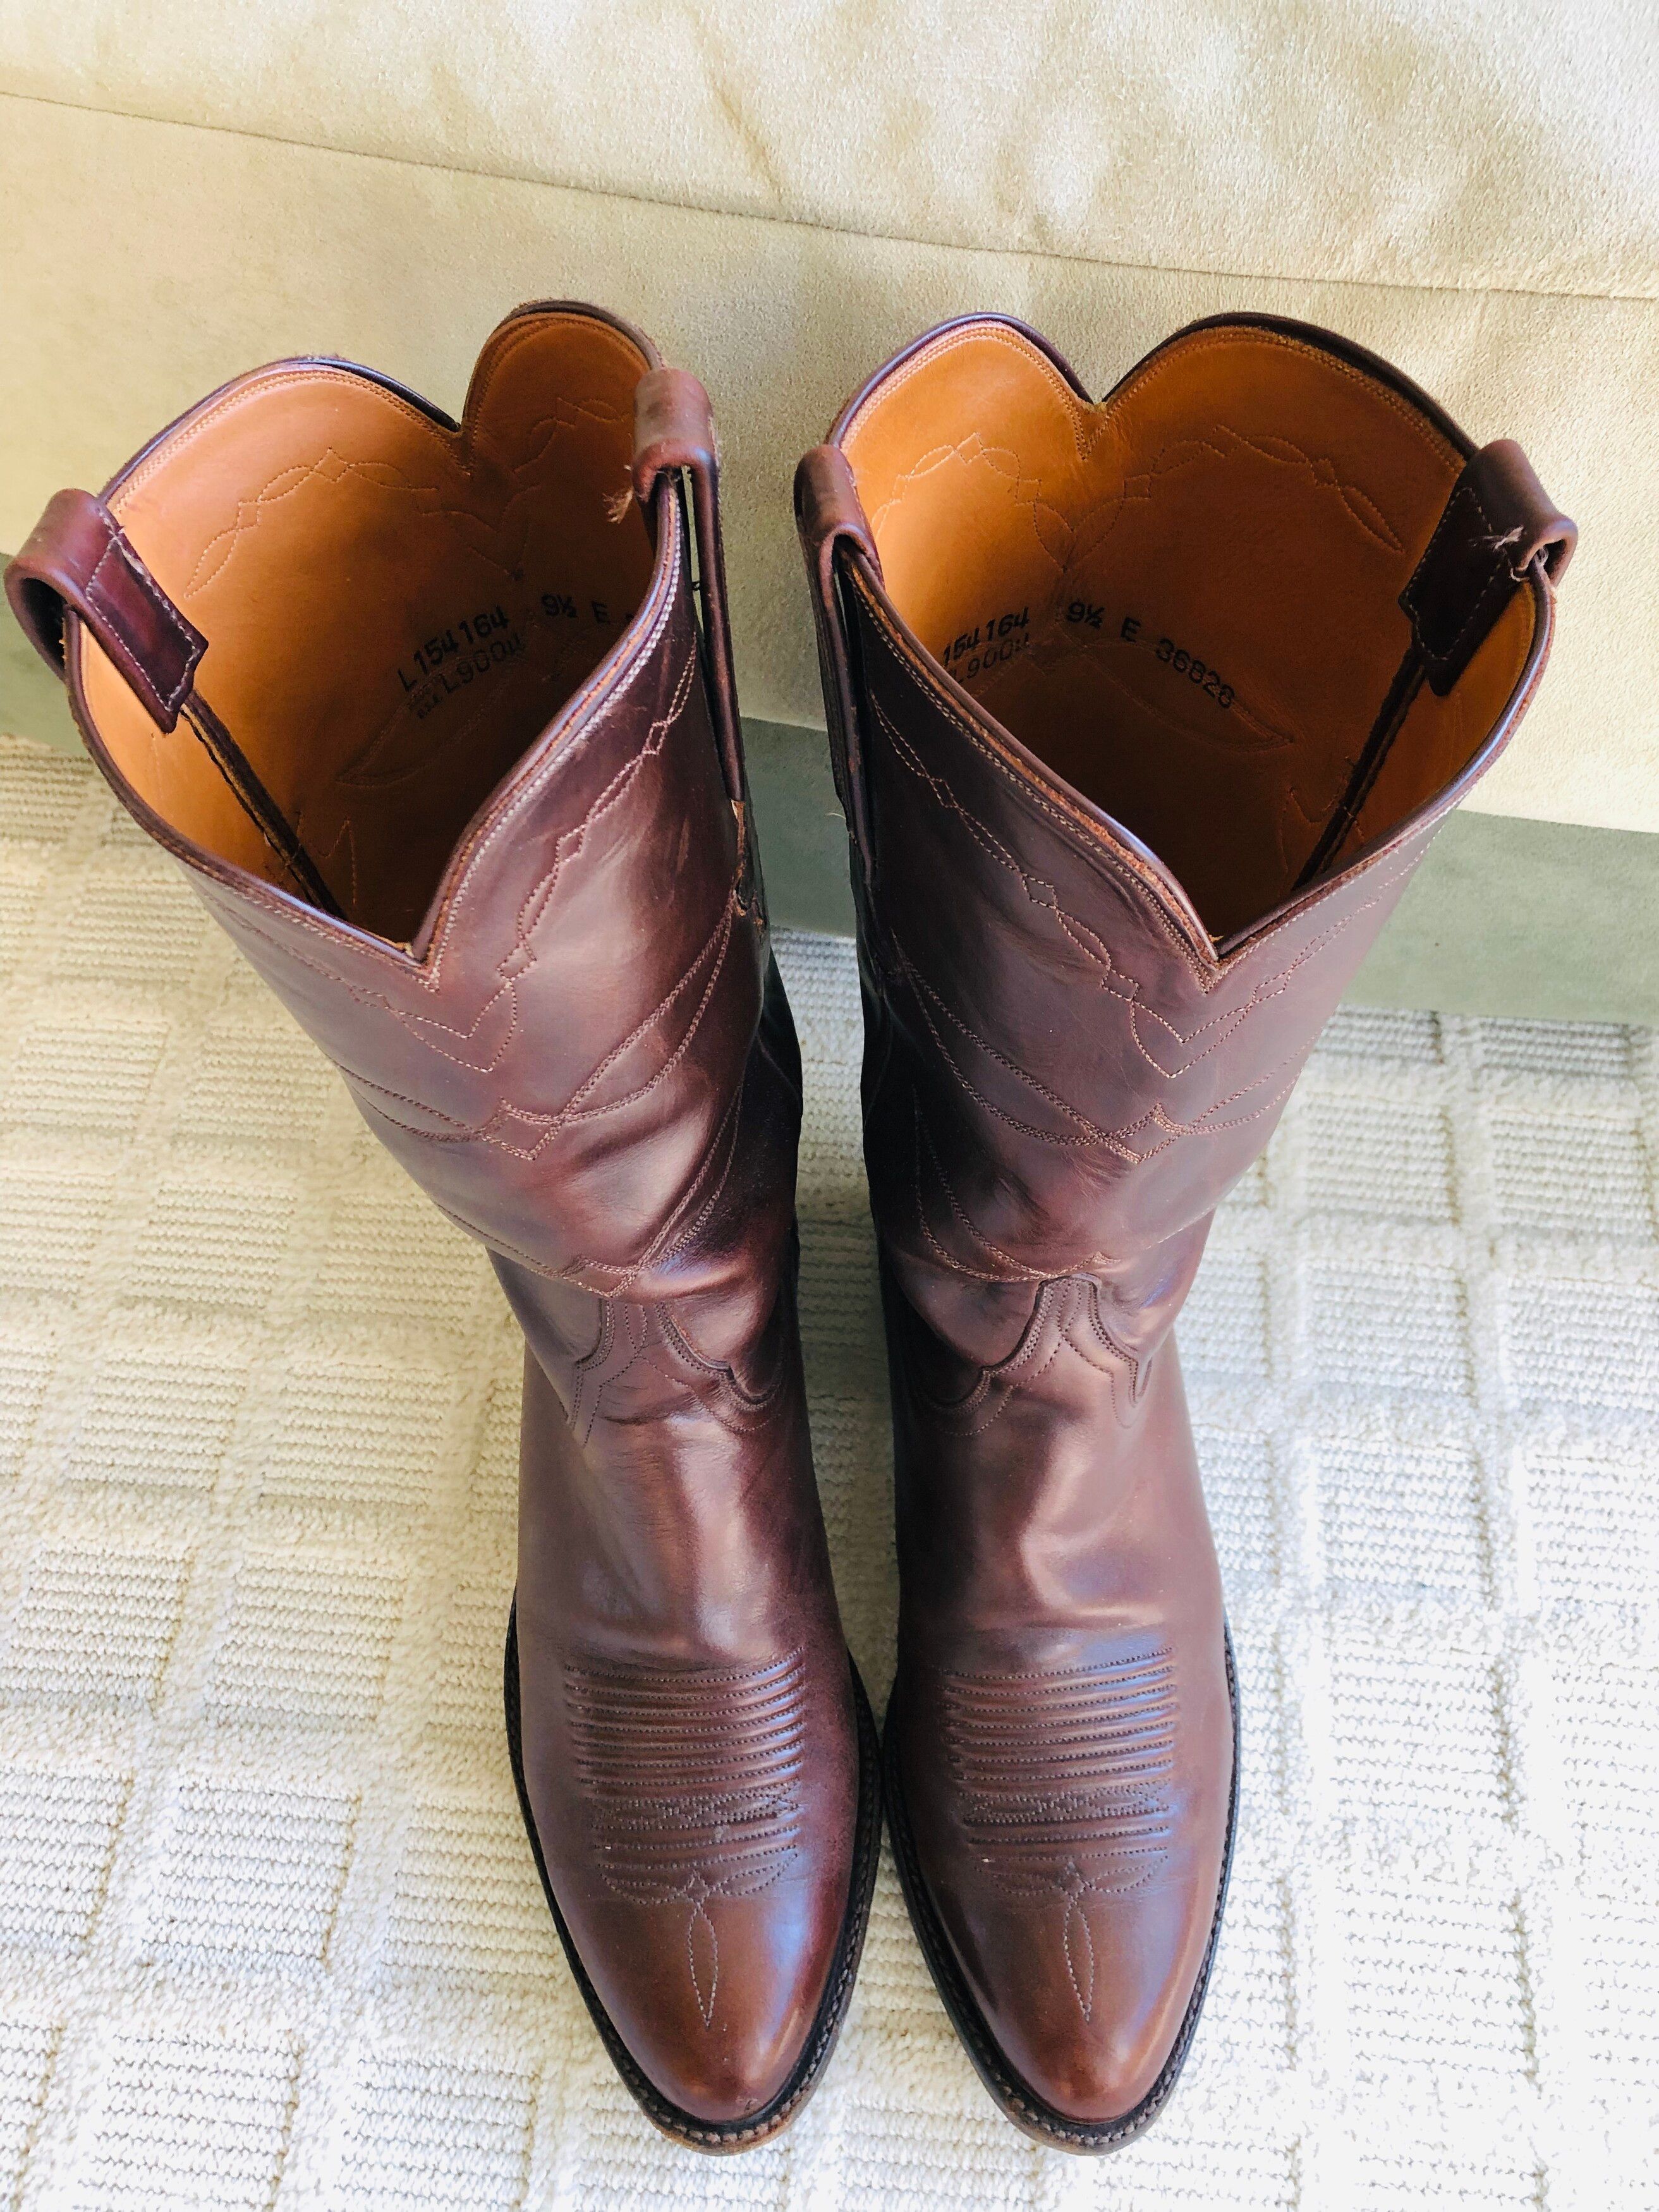 Lucchese Lucchese Men's Handmade Classic Western Boots Size US 9 / EU 42 - 4 Thumbnail